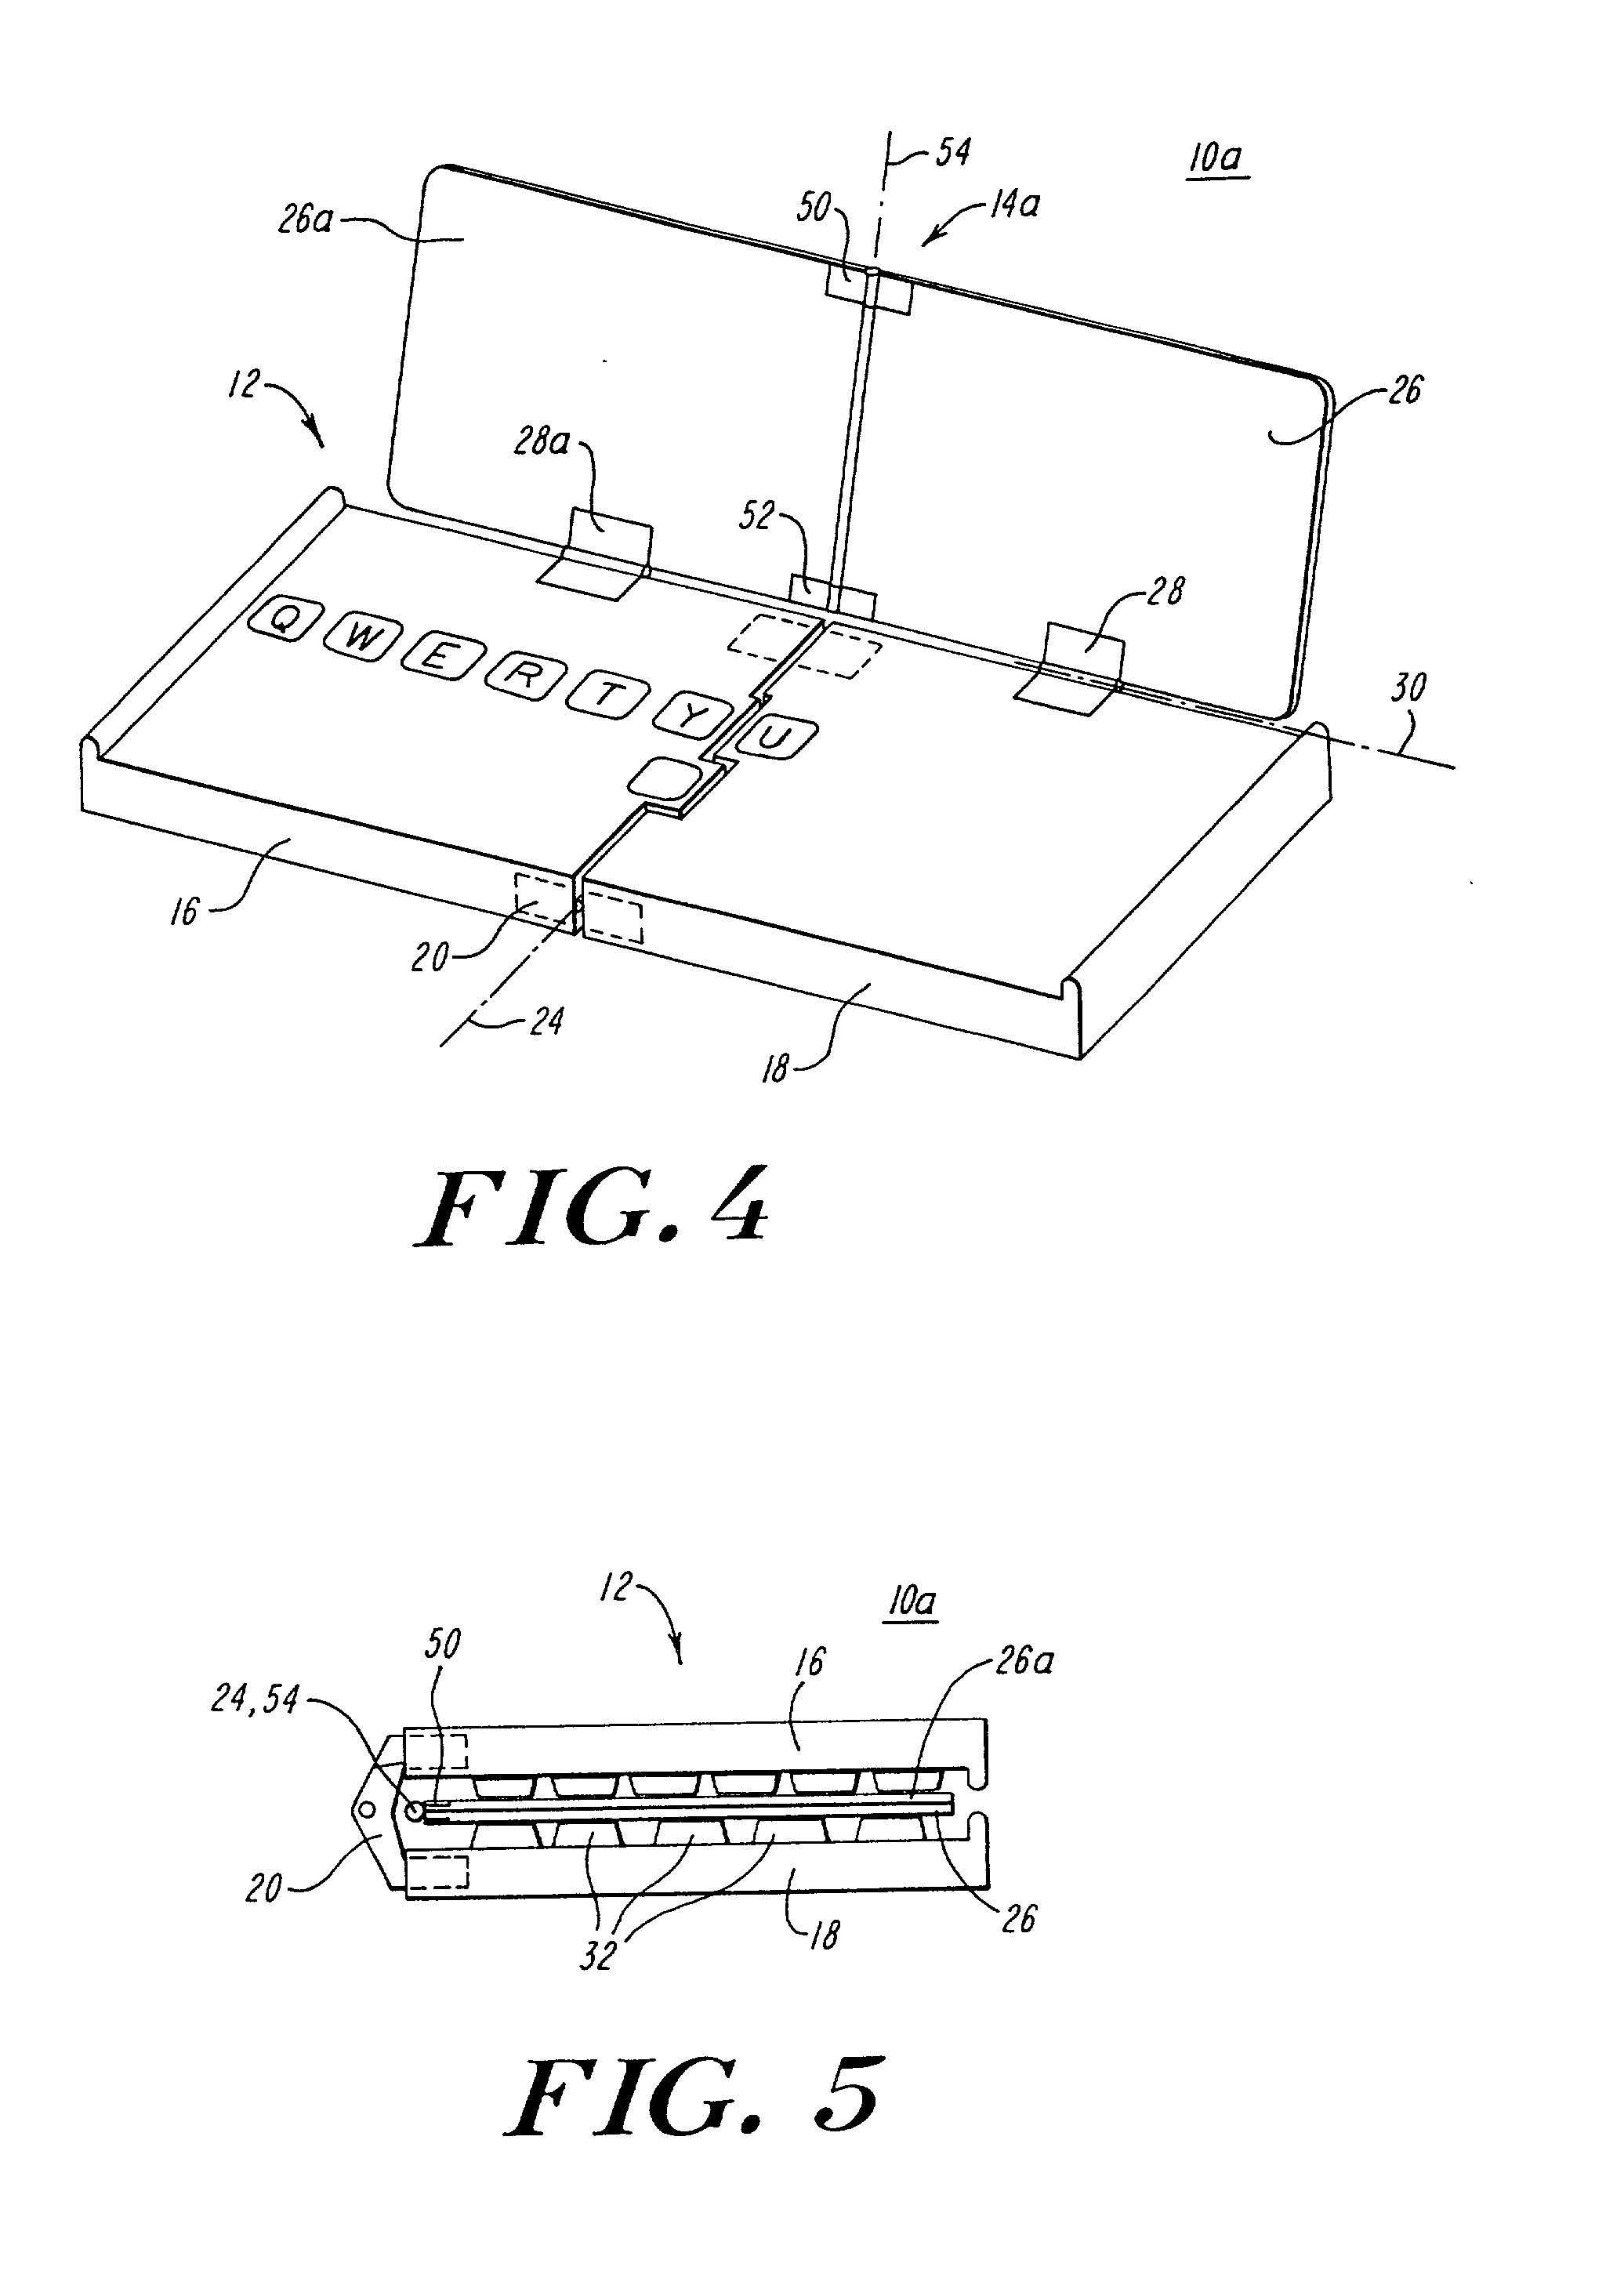 Collapsible portable electronic device with display